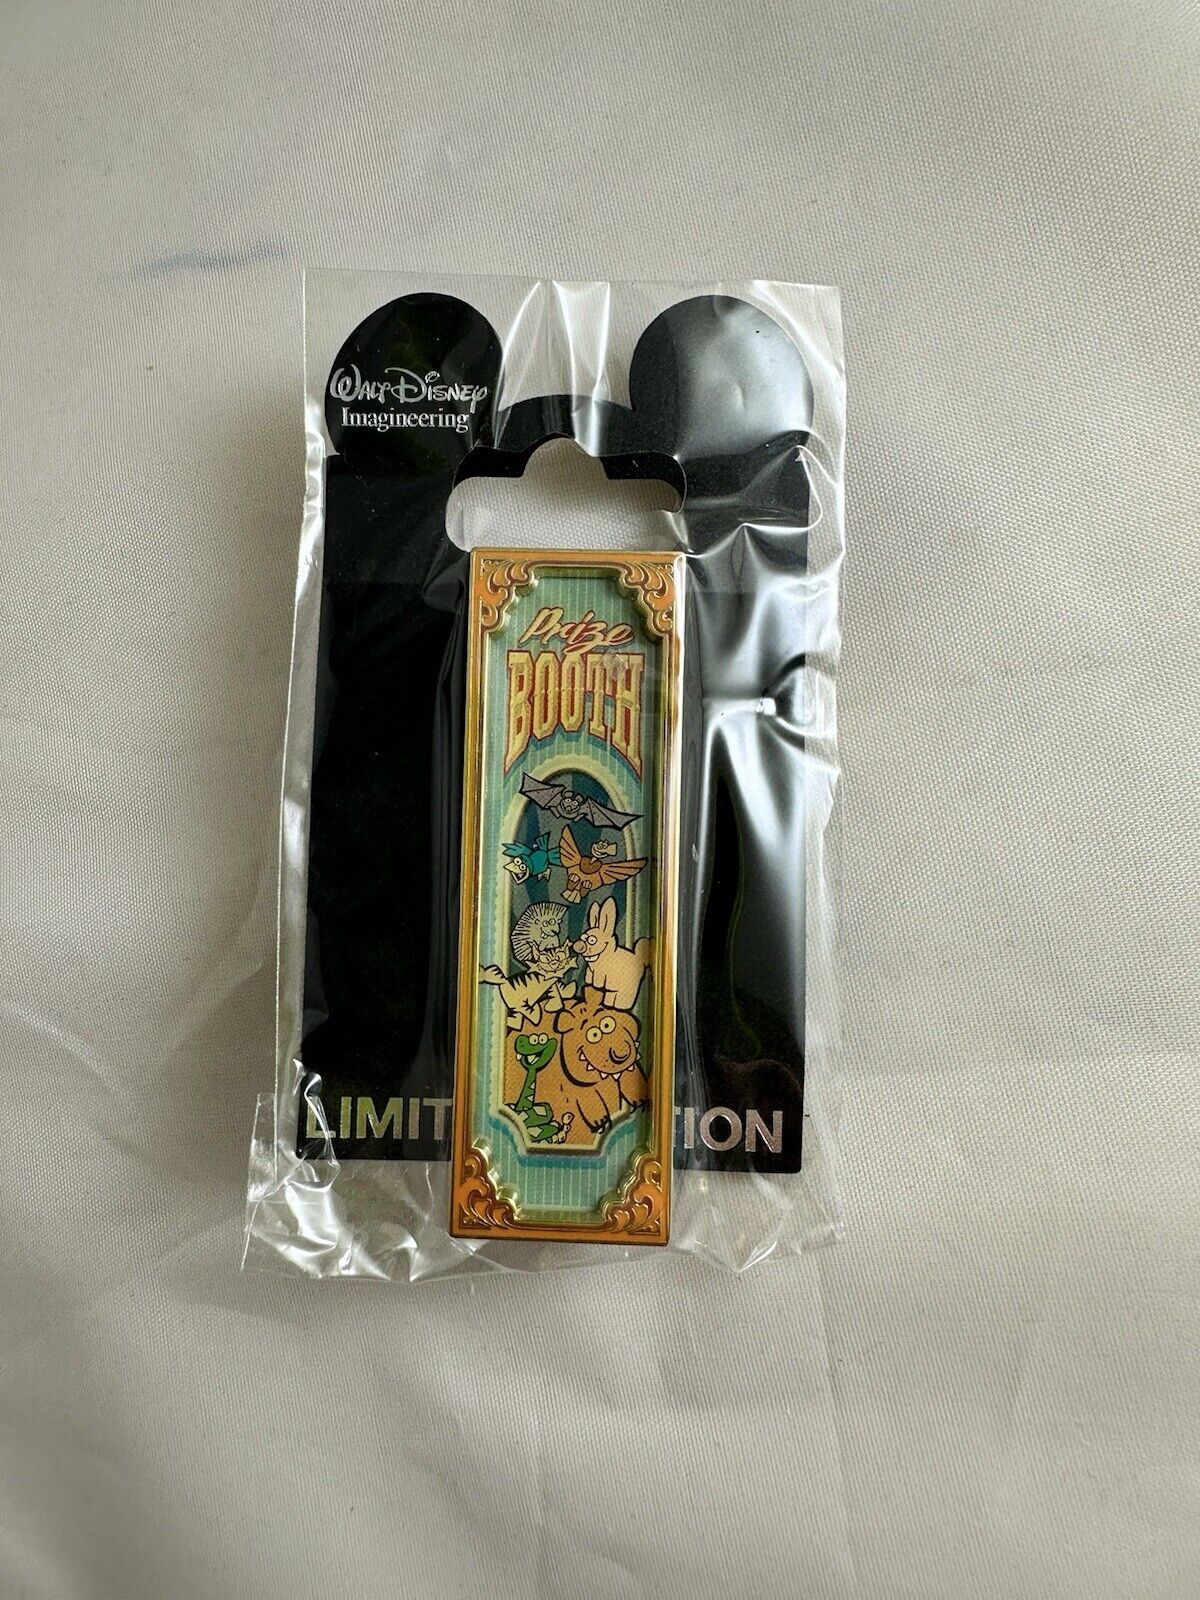 WDI - Toy Story Midway Mania - Banner - Prize Booth LE 300 Disney Pin 64026